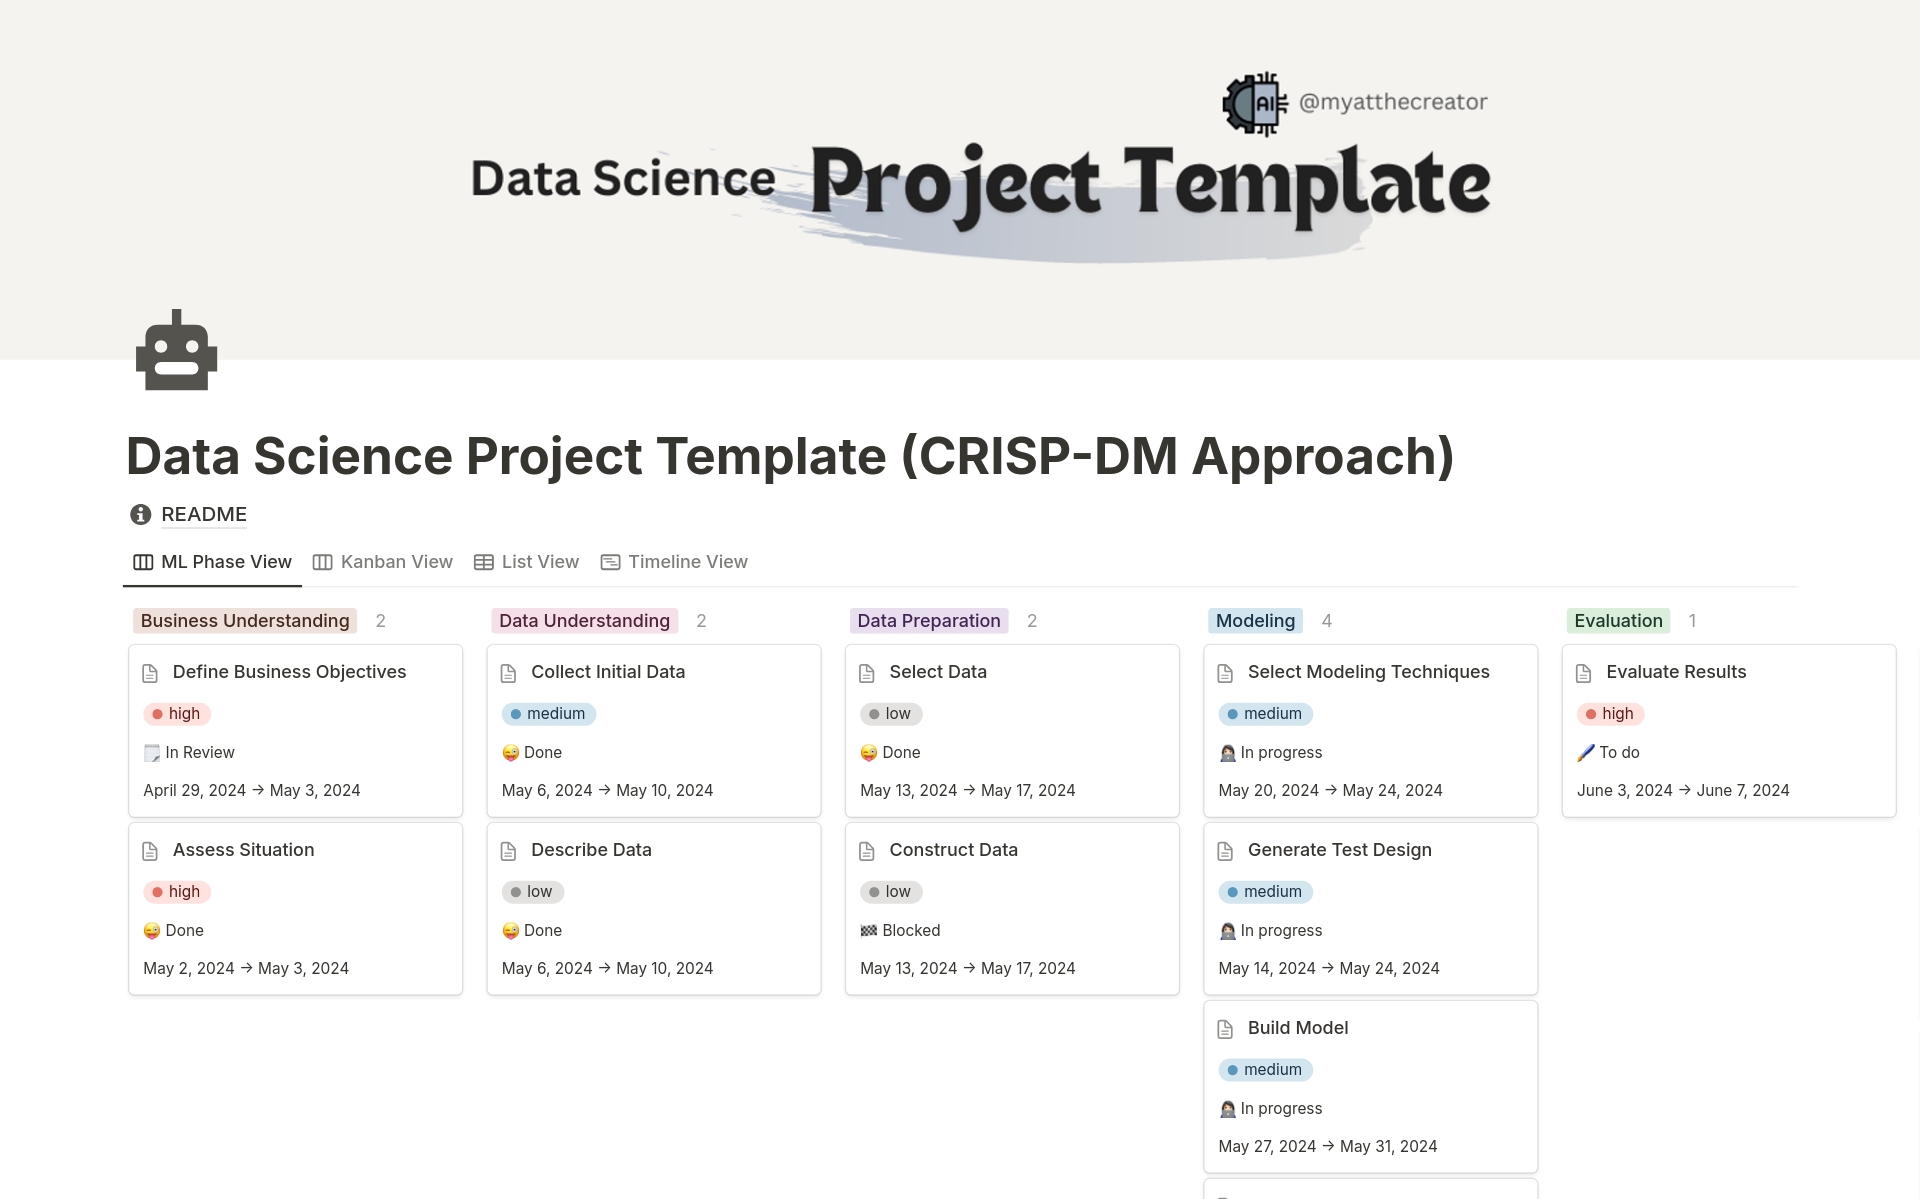 🚀 Supercharge Your Data Science Projects with Notion! 🚀
This template is your all-in-one toolkit for mastering data science project management.